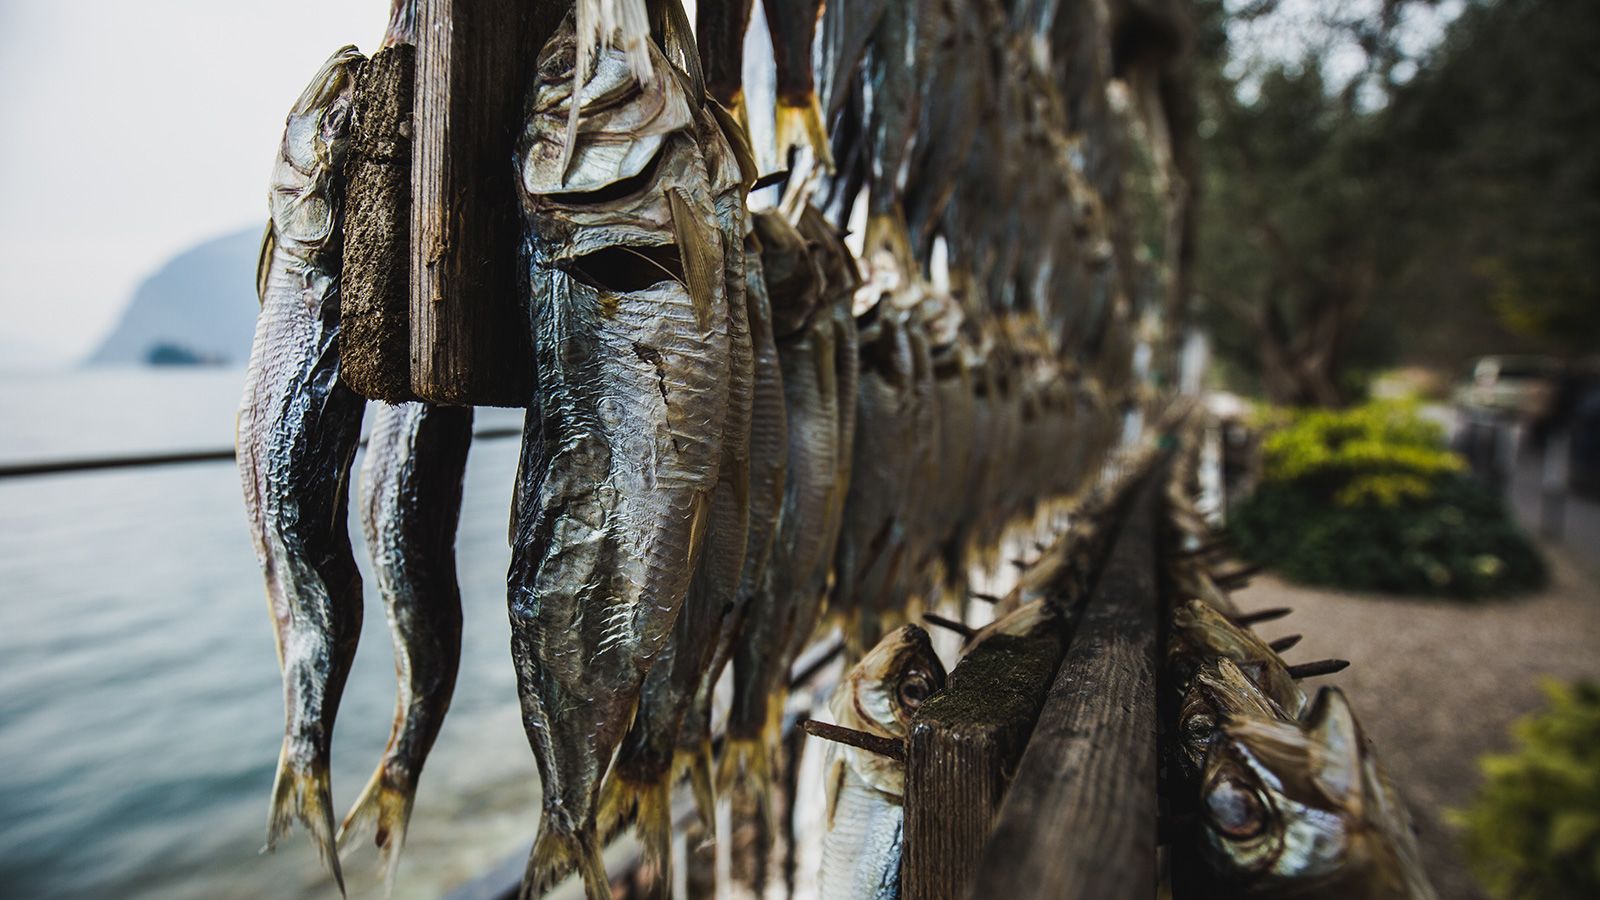 <strong>Air dried:</strong> On Lake Iseo, "sardines" (larger than sardines we know) are dried in the sun.